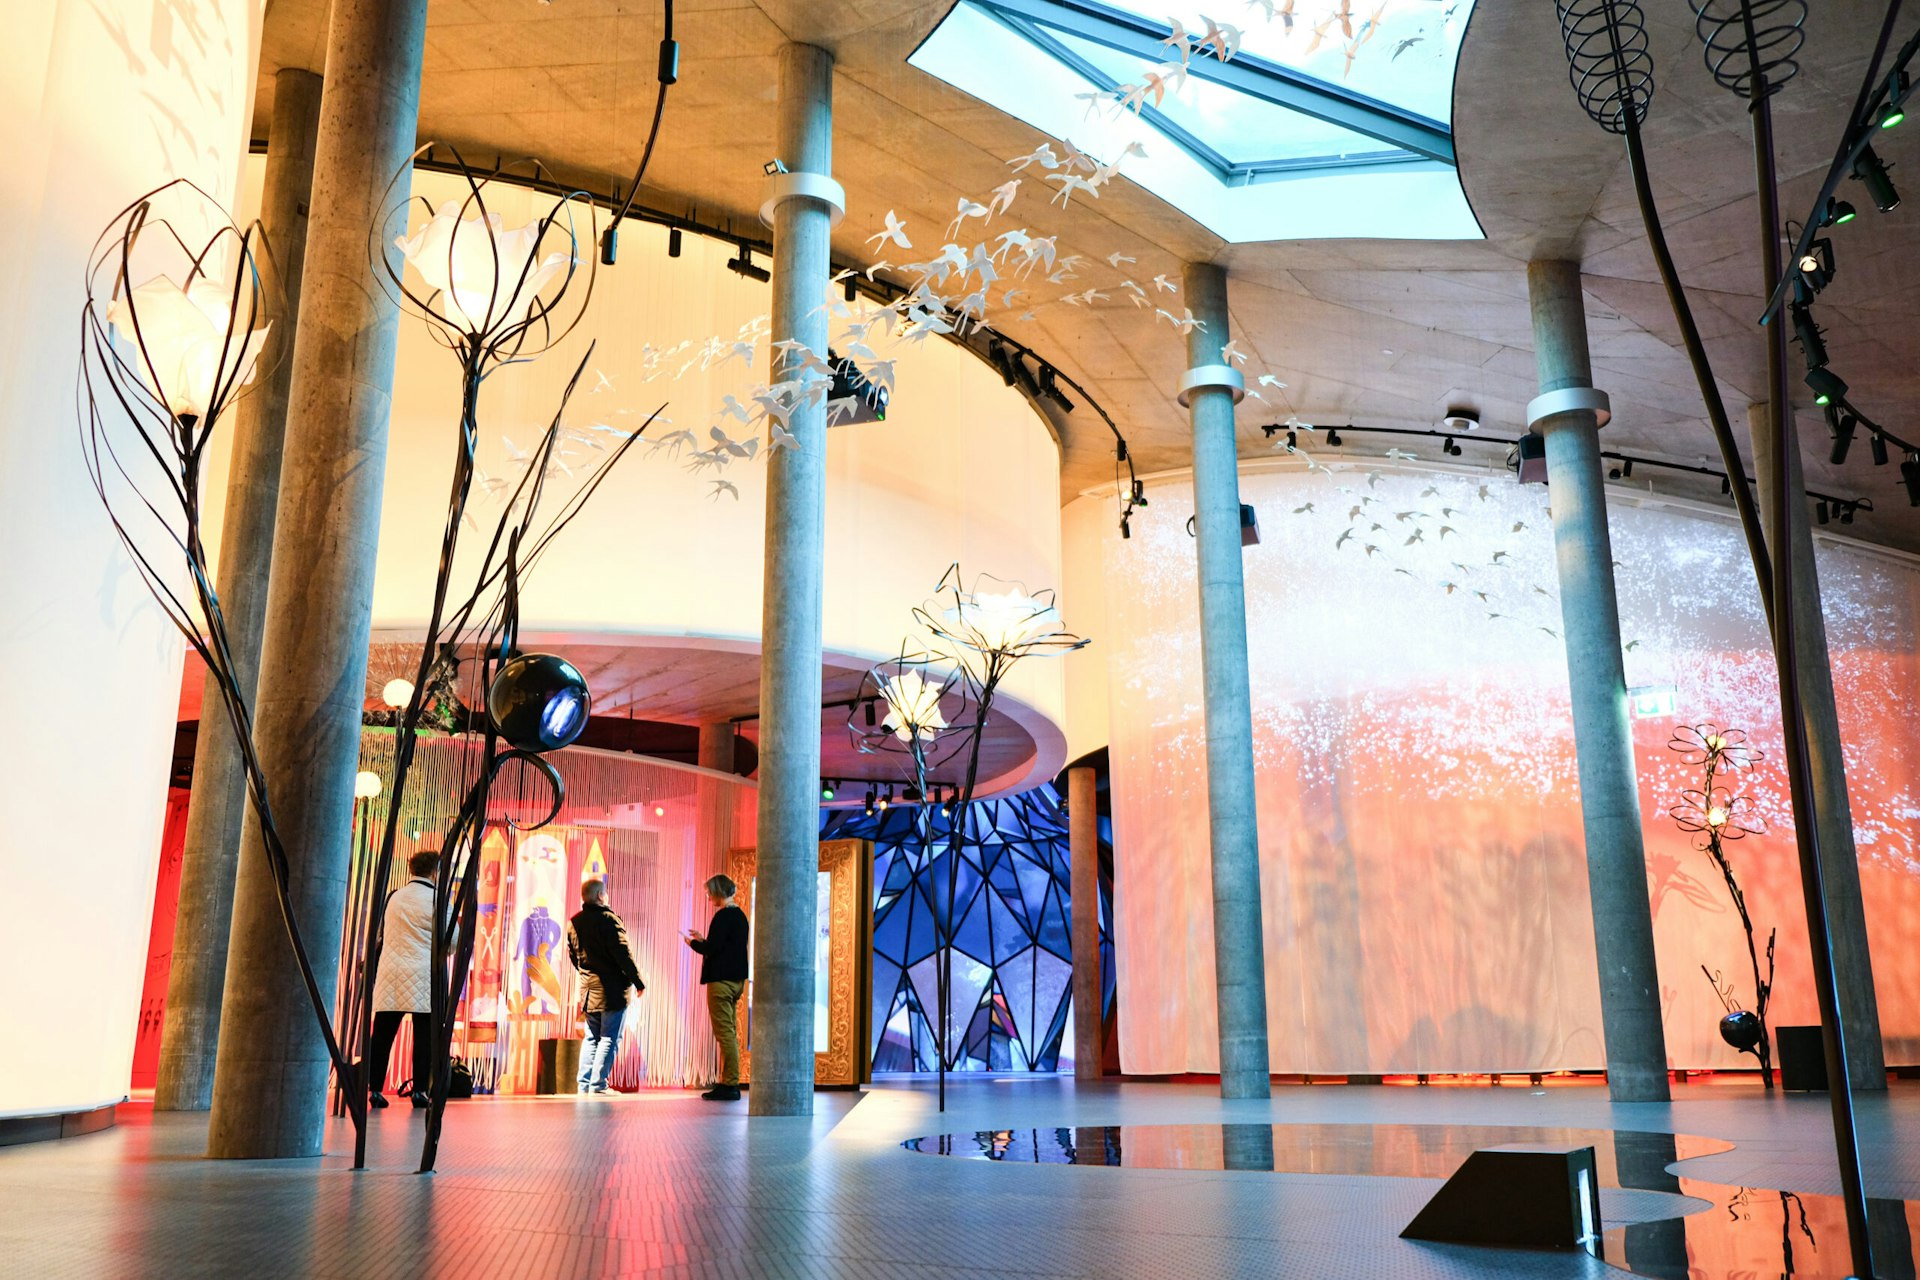 A large colourful curved wall with displays of light, with sculptures of giant flowers and bids soaring above